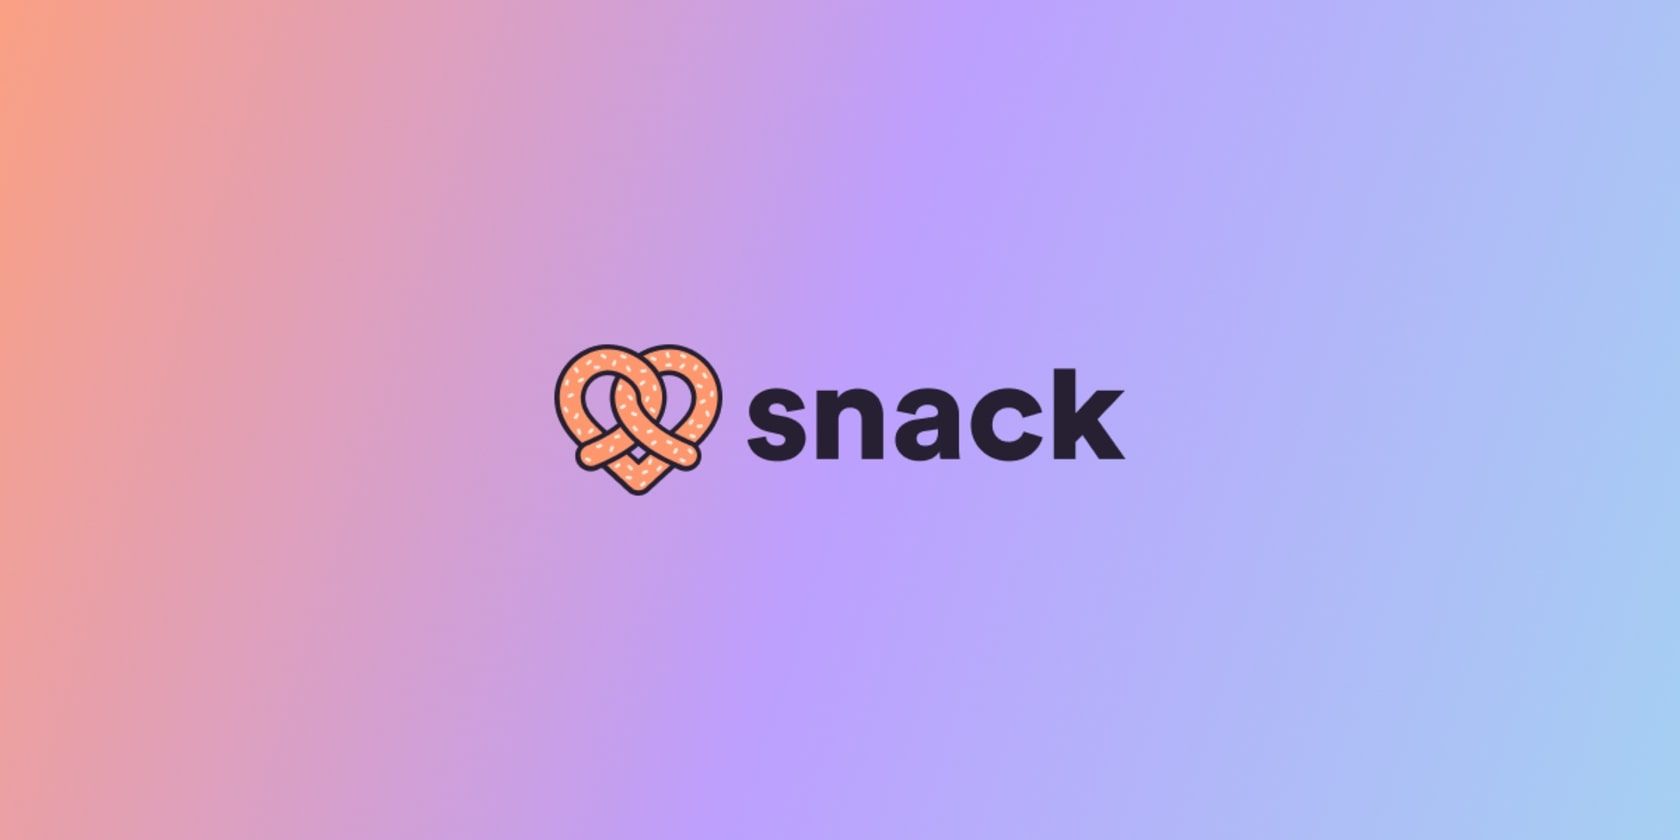 What Is Snack? A New 'Tinder Meets TikTok' Dating App